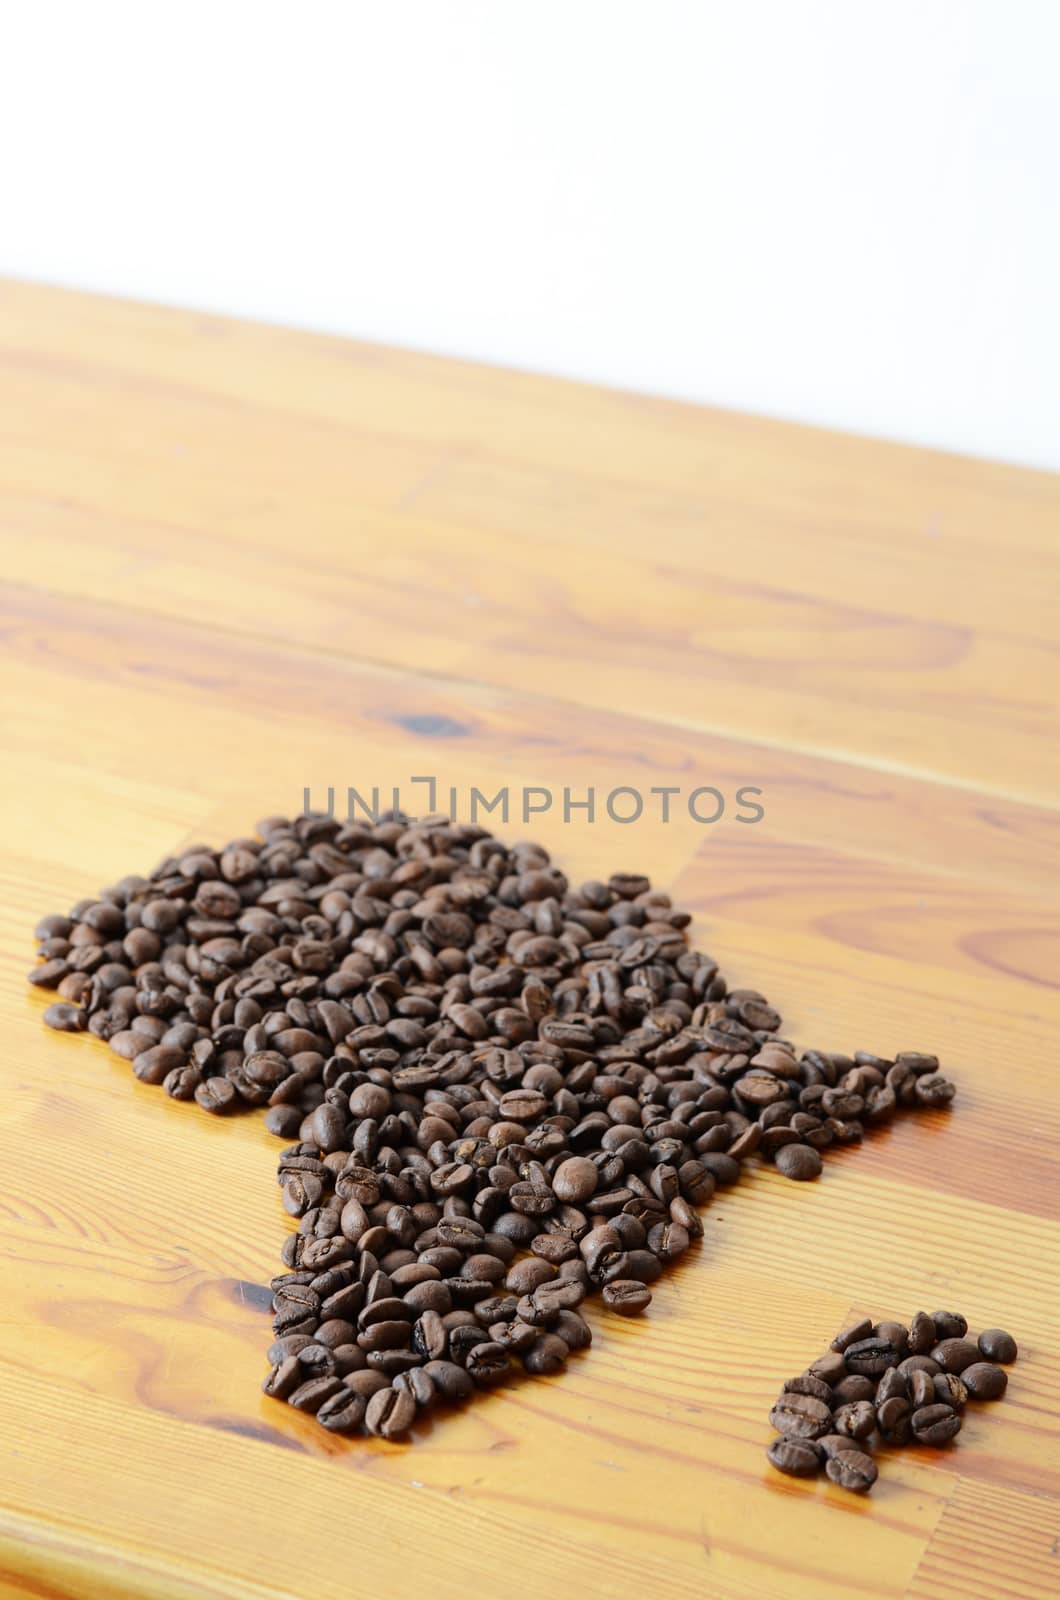 africa symbol made of coffee by sarkao